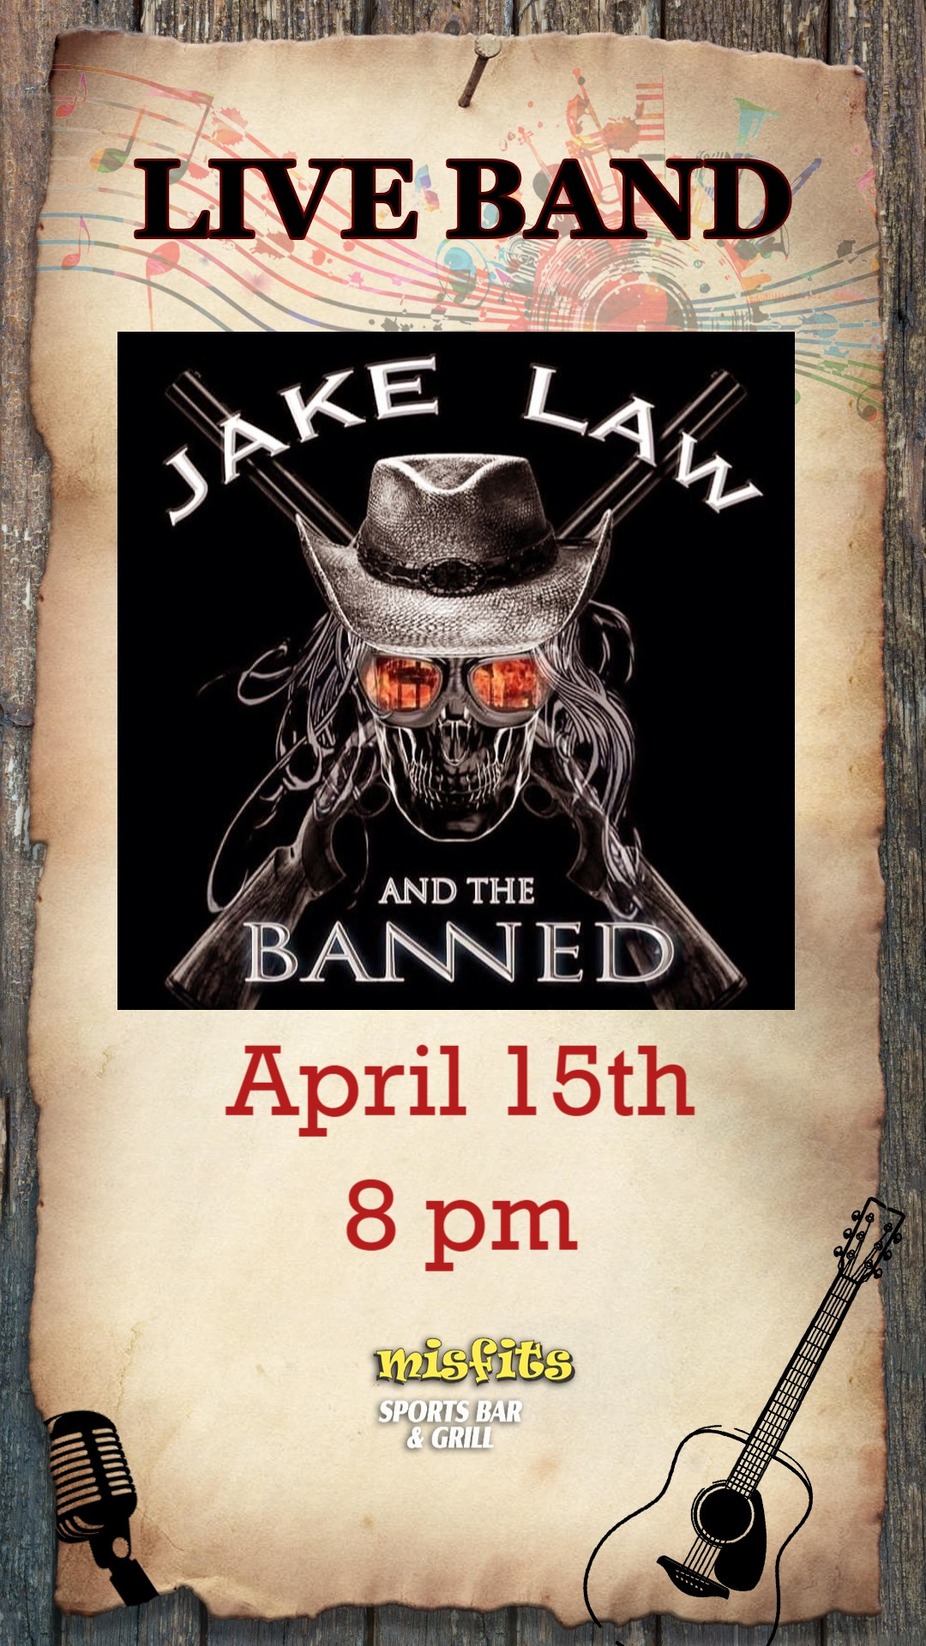 Jake Law event photo